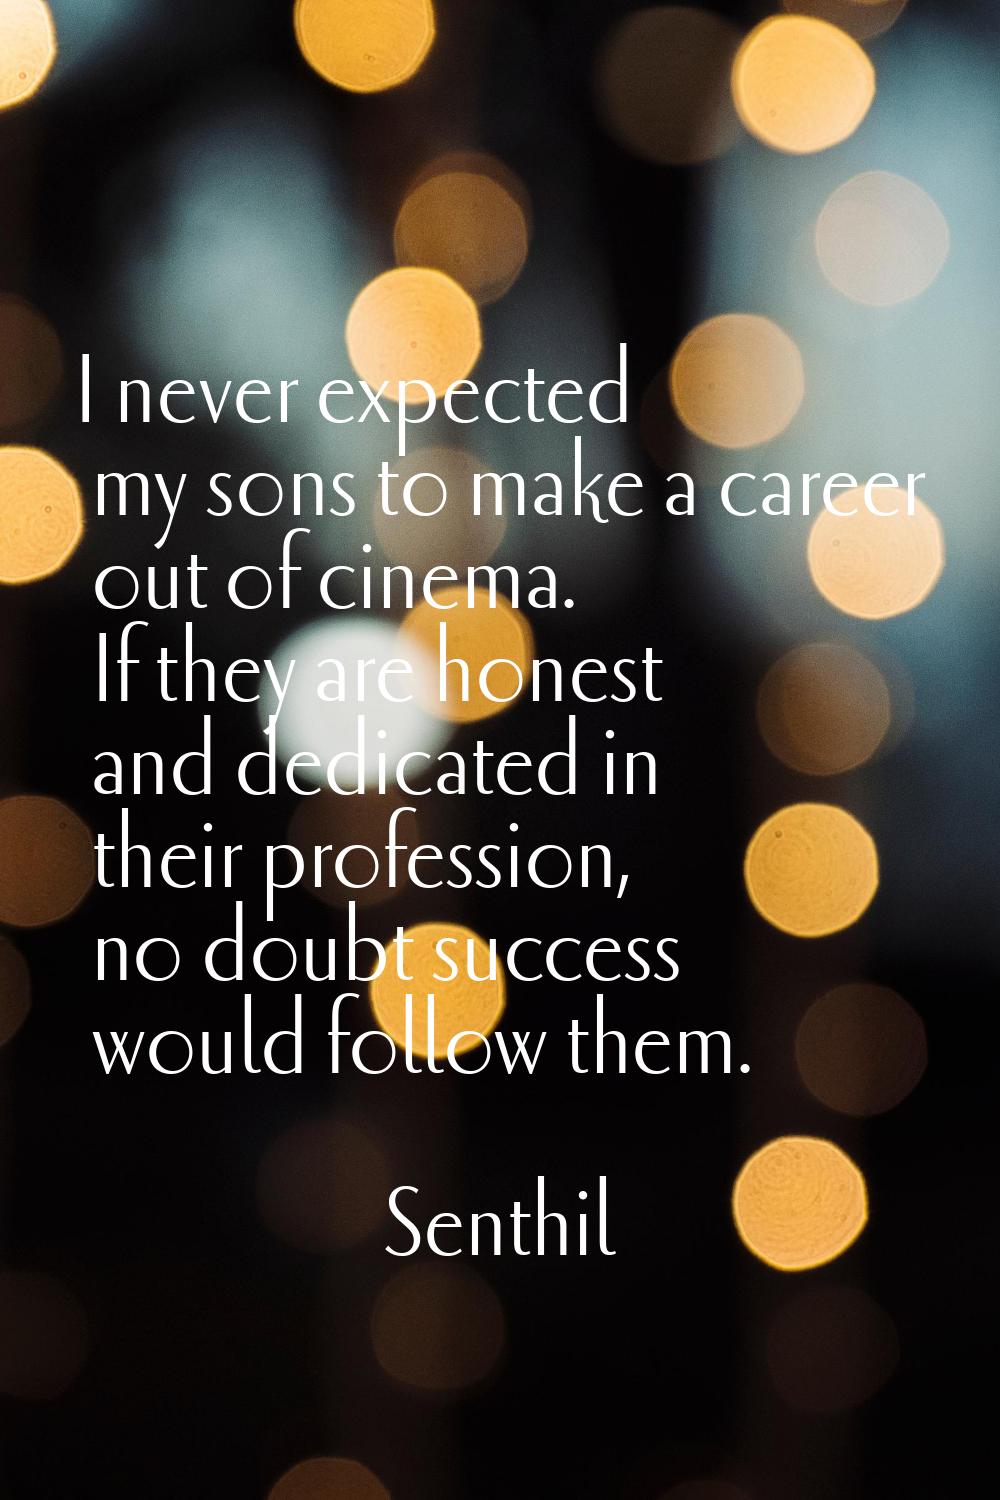 I never expected my sons to make a career out of cinema. If they are honest and dedicated in their 